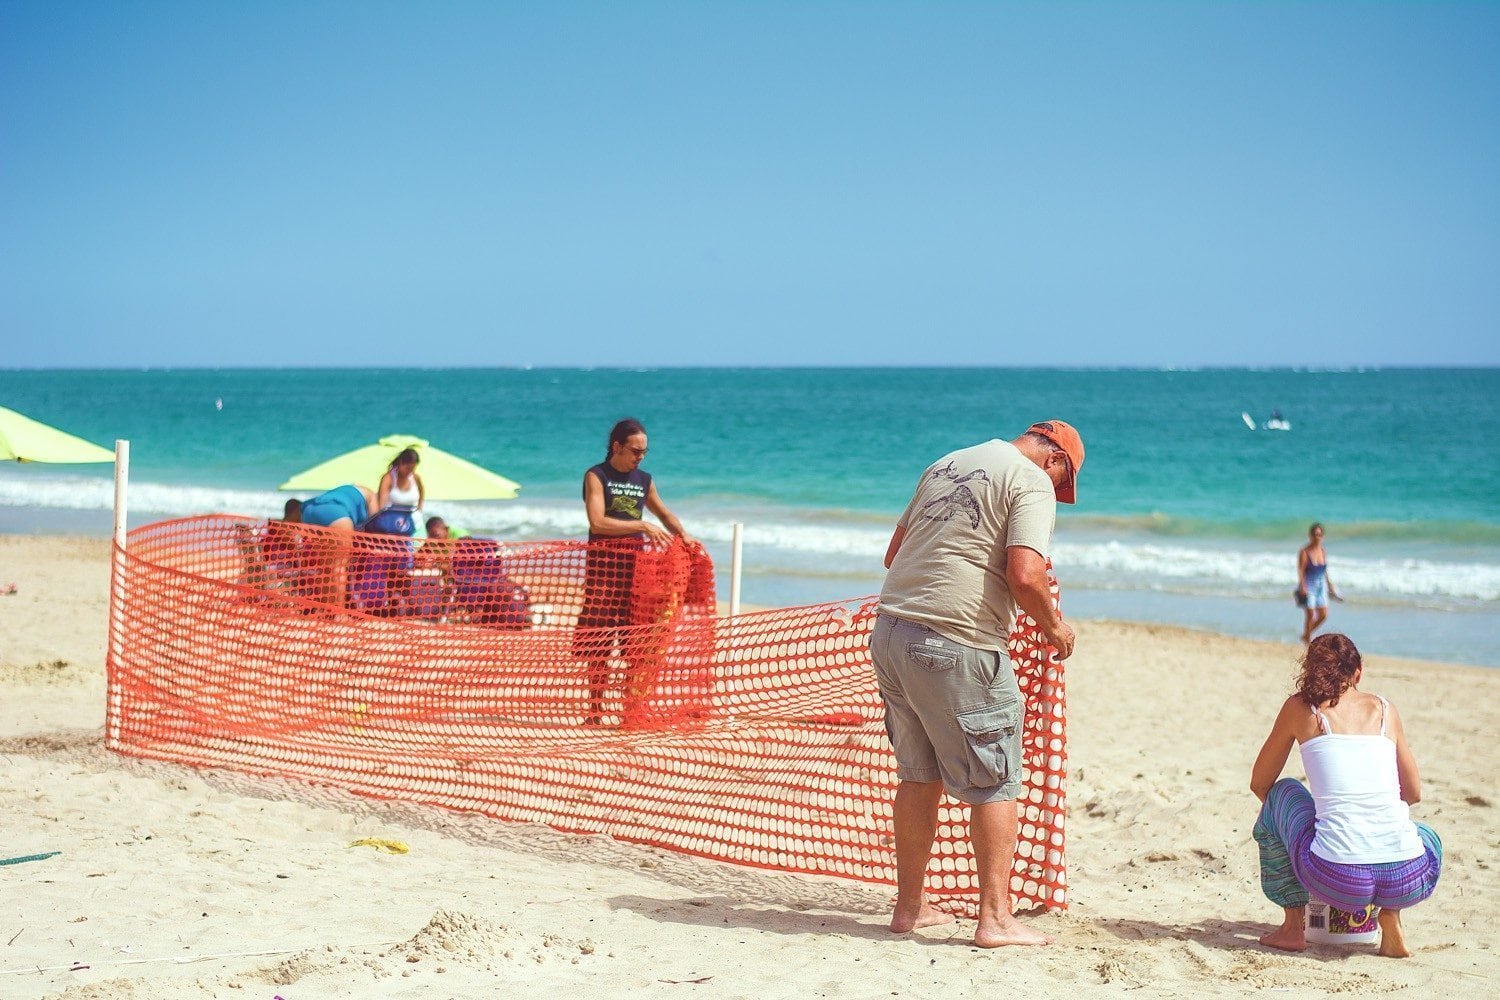 Edwin and Annette setting up a Fence to Protect a Sea Turtle Nest.